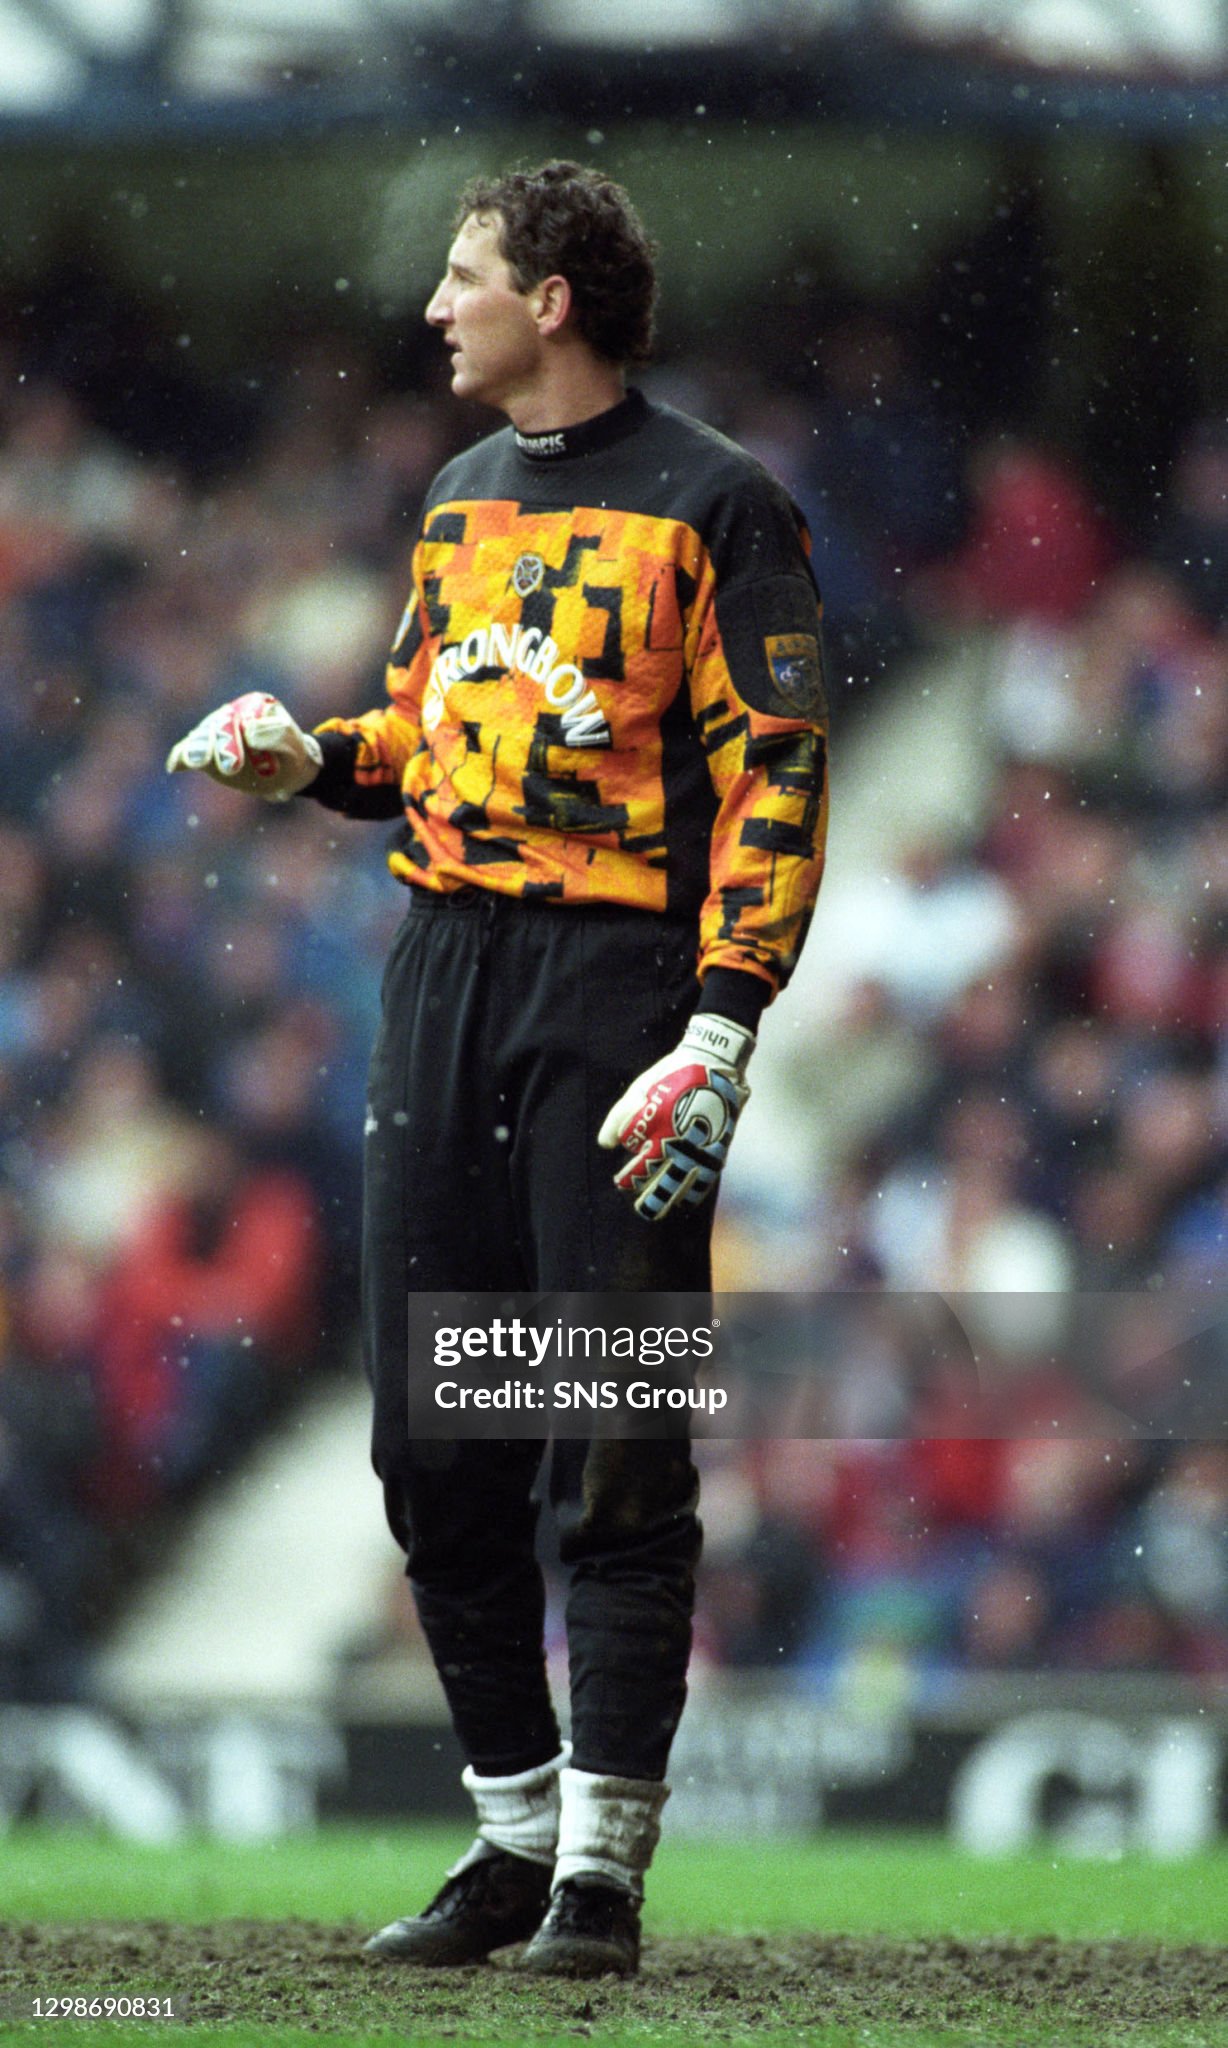 28/02/98 BELL'S PREMIER DIVISION.RANGERS V HEARTS (2-2).IBROX - GLASGOW.Hearts goalkeeper Gilles Rousset  ..   (Photo by SNS Group via Getty Images)